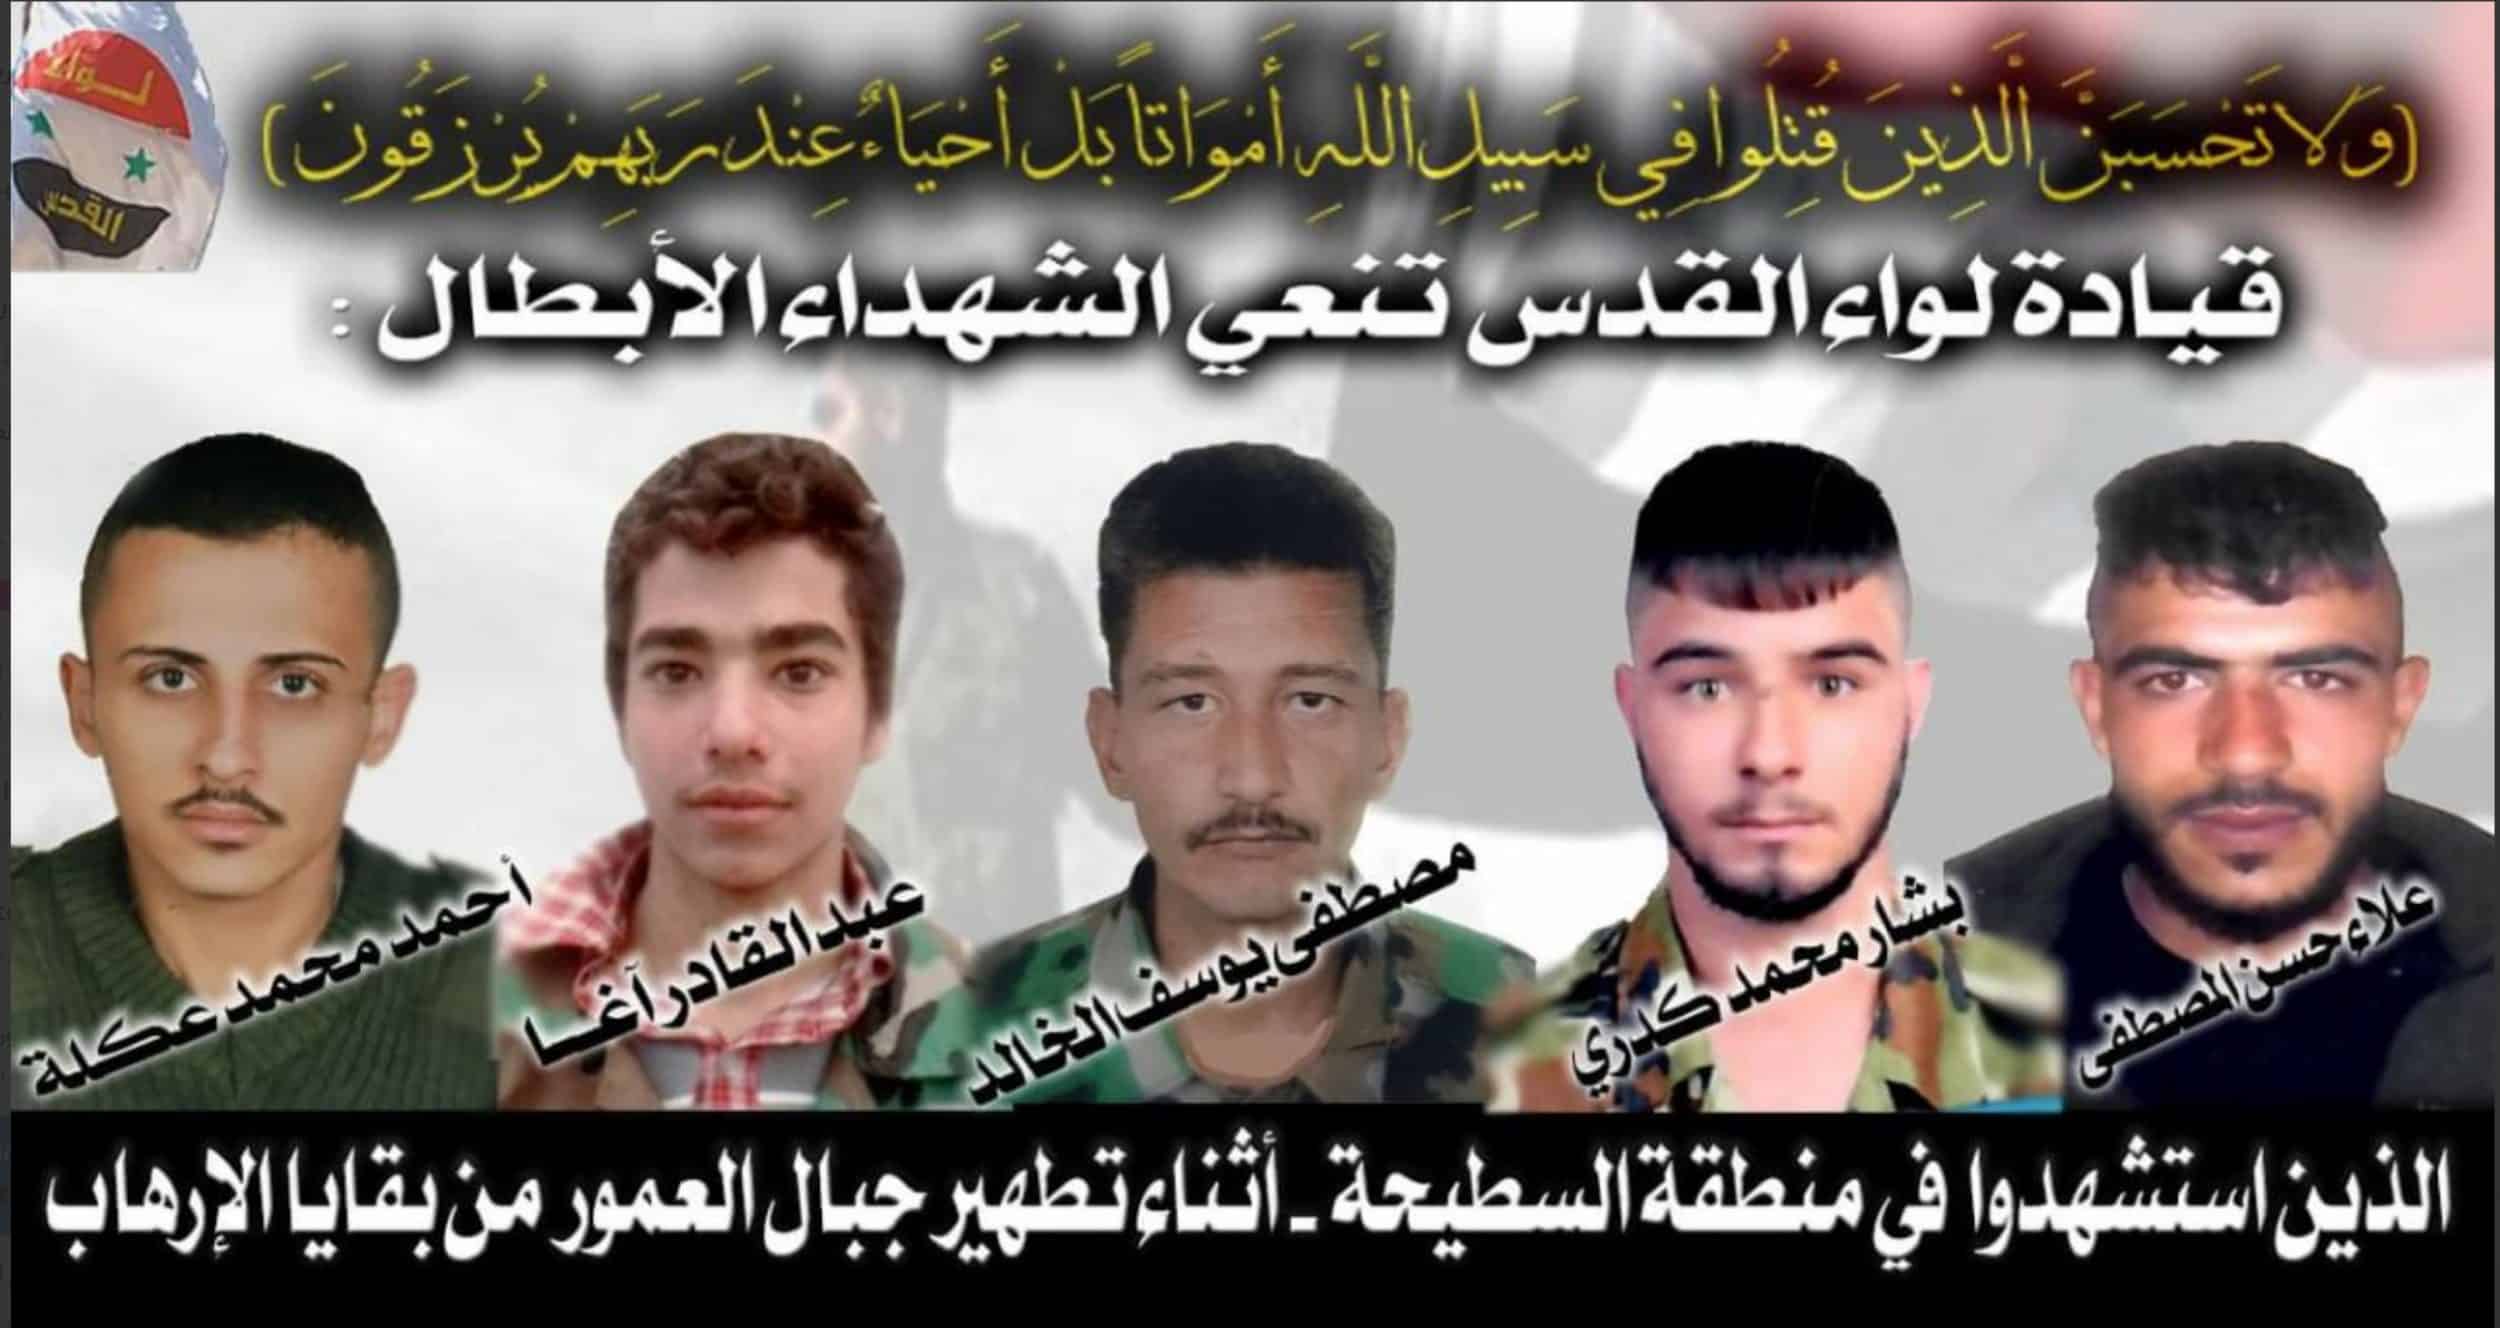 (Photo) Five Syrian Liwaa al-Quds Fighters Were Killed and Several Others Injured in Clashes With Islamic State in Palmyra, Homs, Syria - 17 March 2022